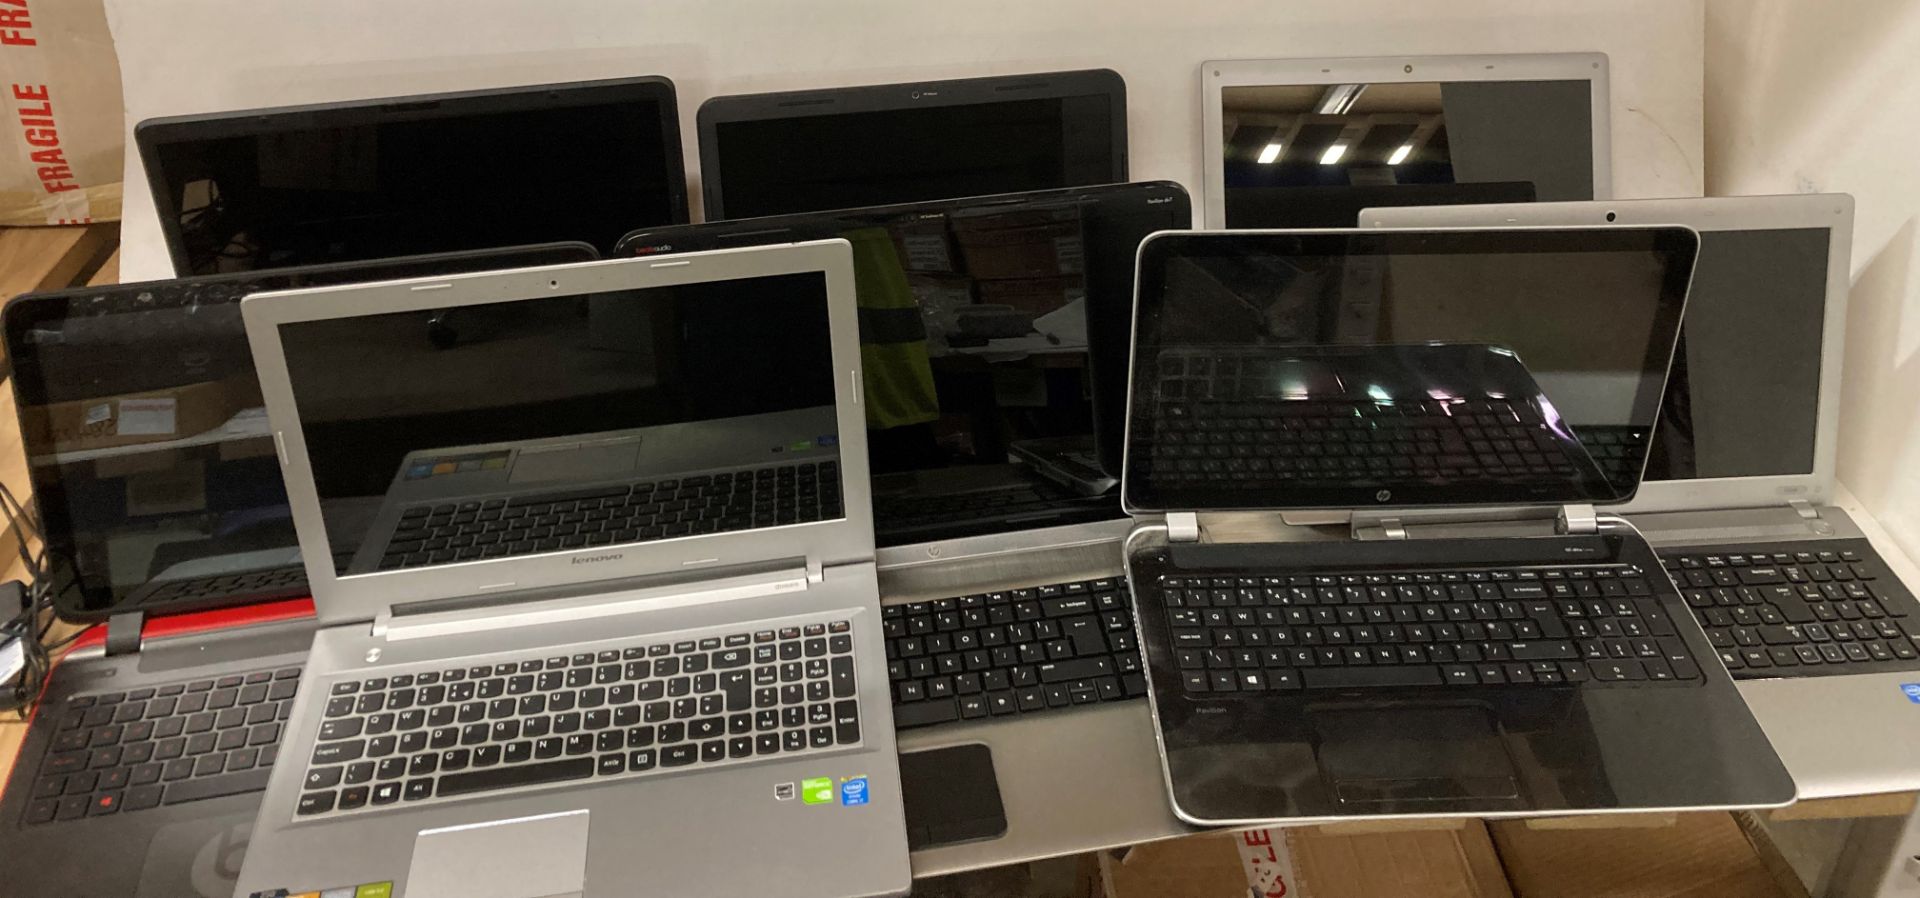 8 x assorted laptops (no batteries or power leads - one screen cracked - all possibly faulty and